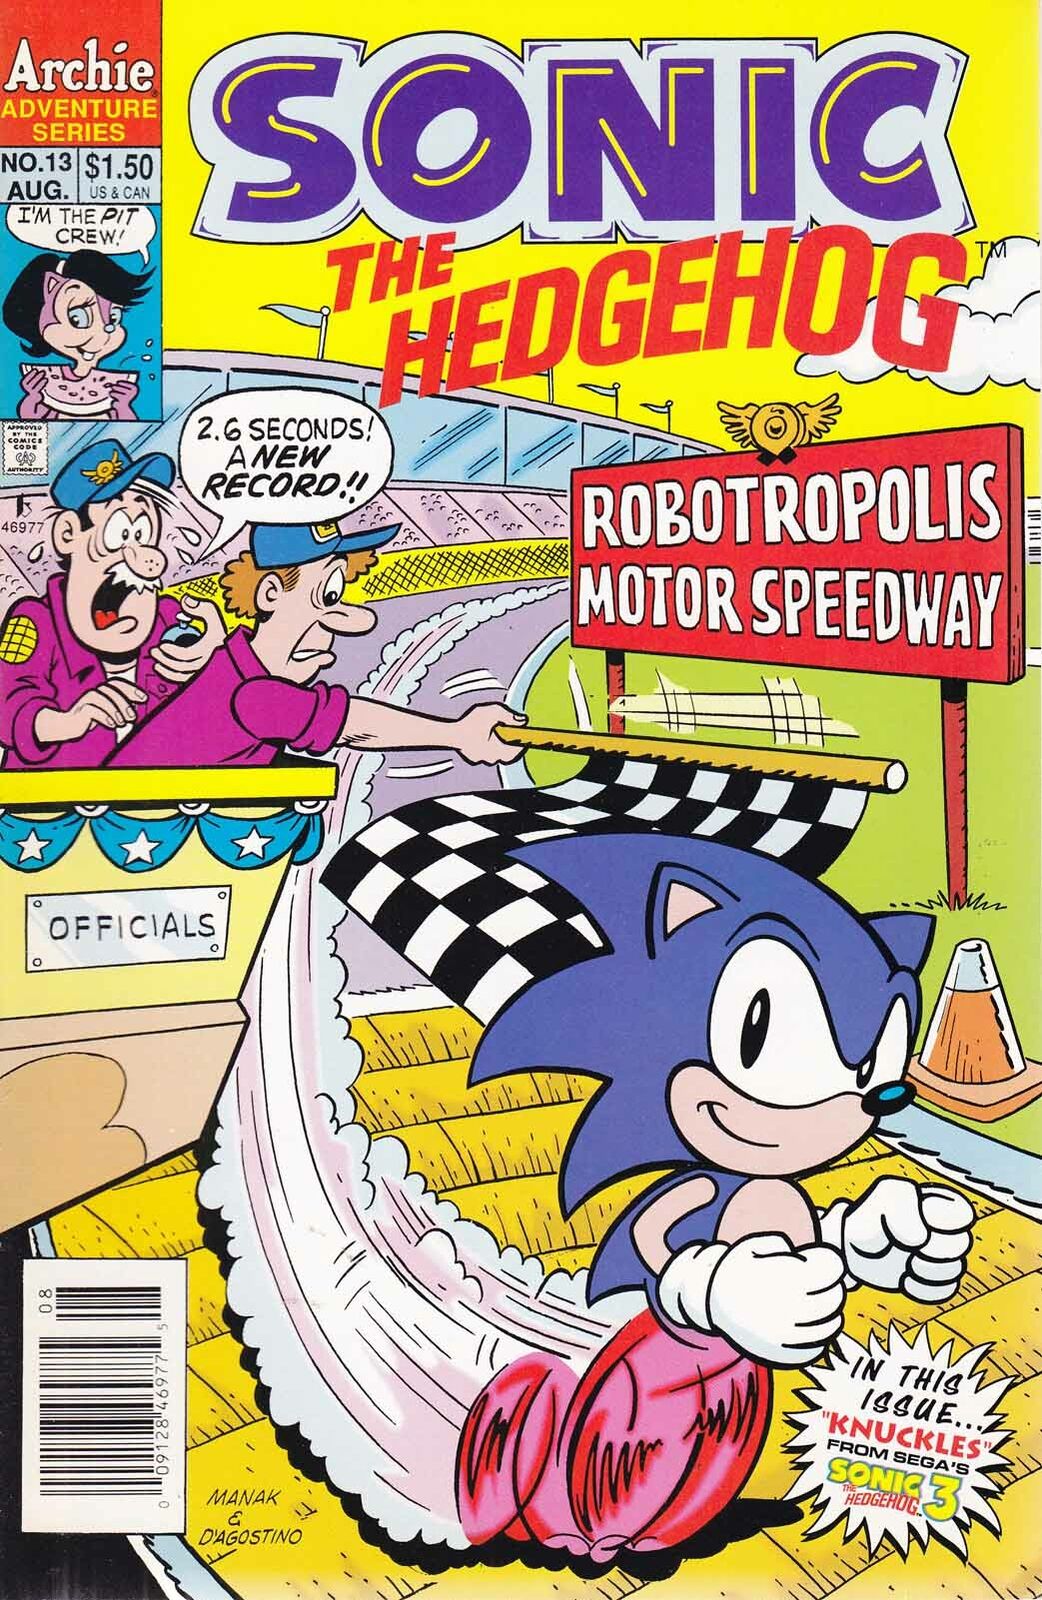 Archie Sonic X Issue 13, Sonic X Wikia